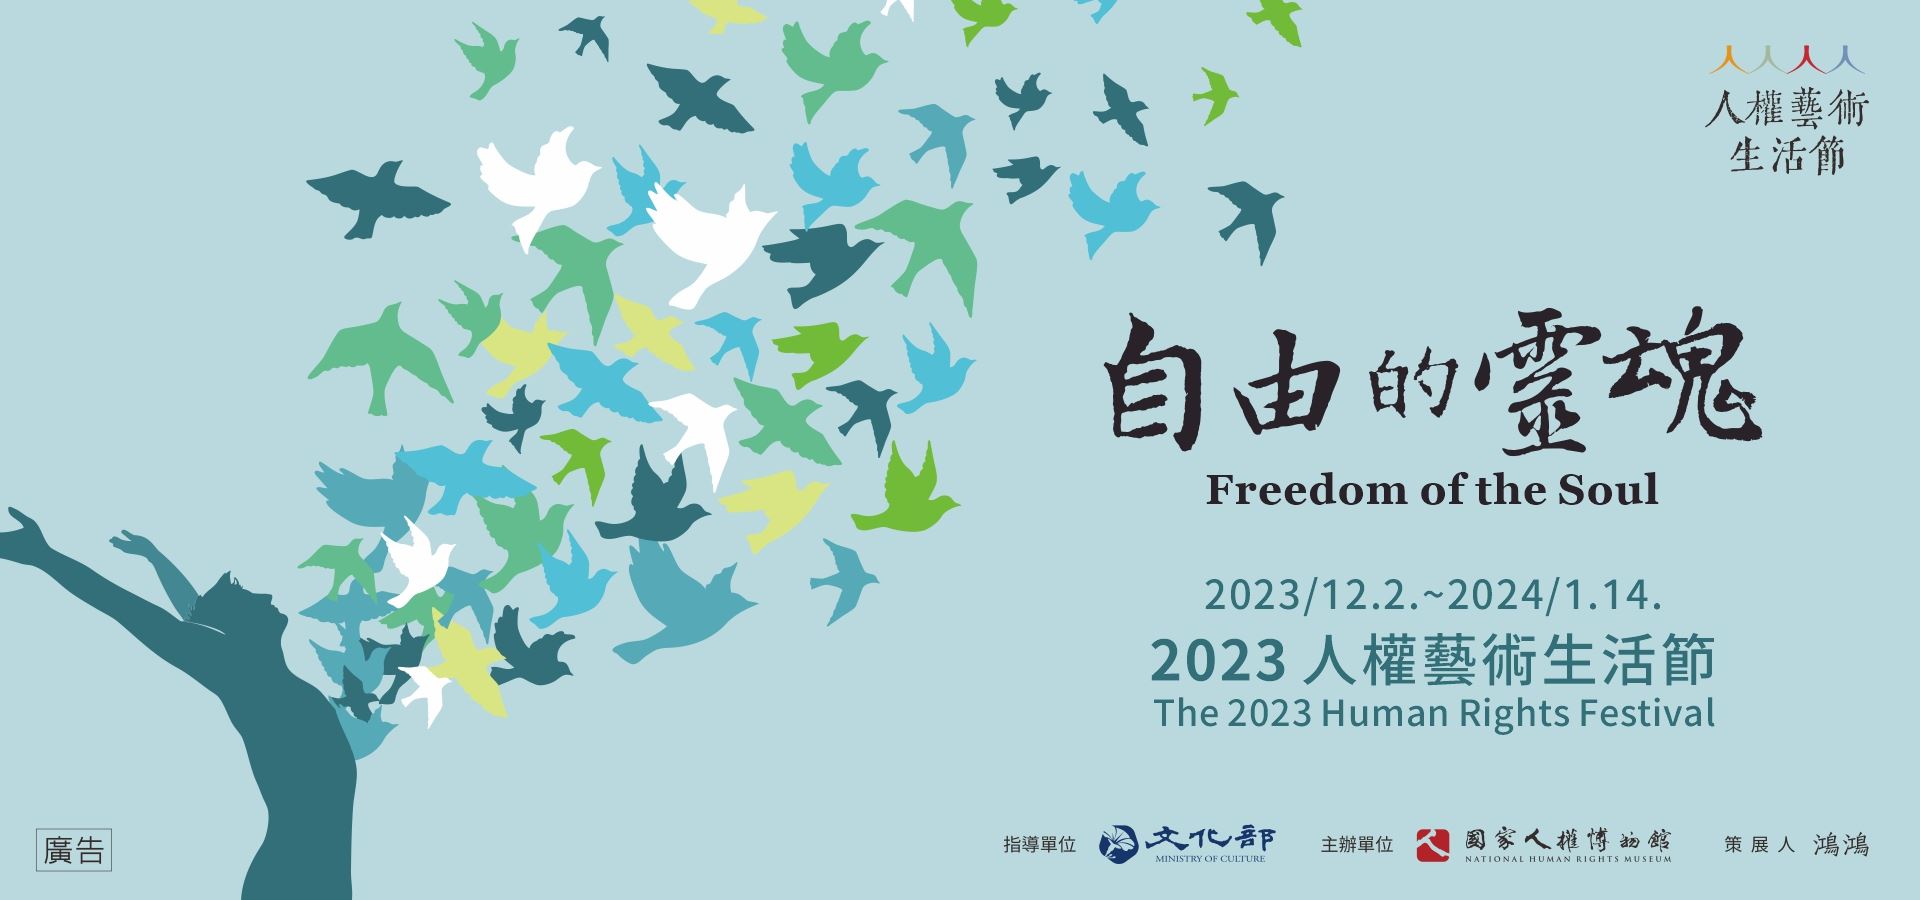 2023 Human Rights Festival